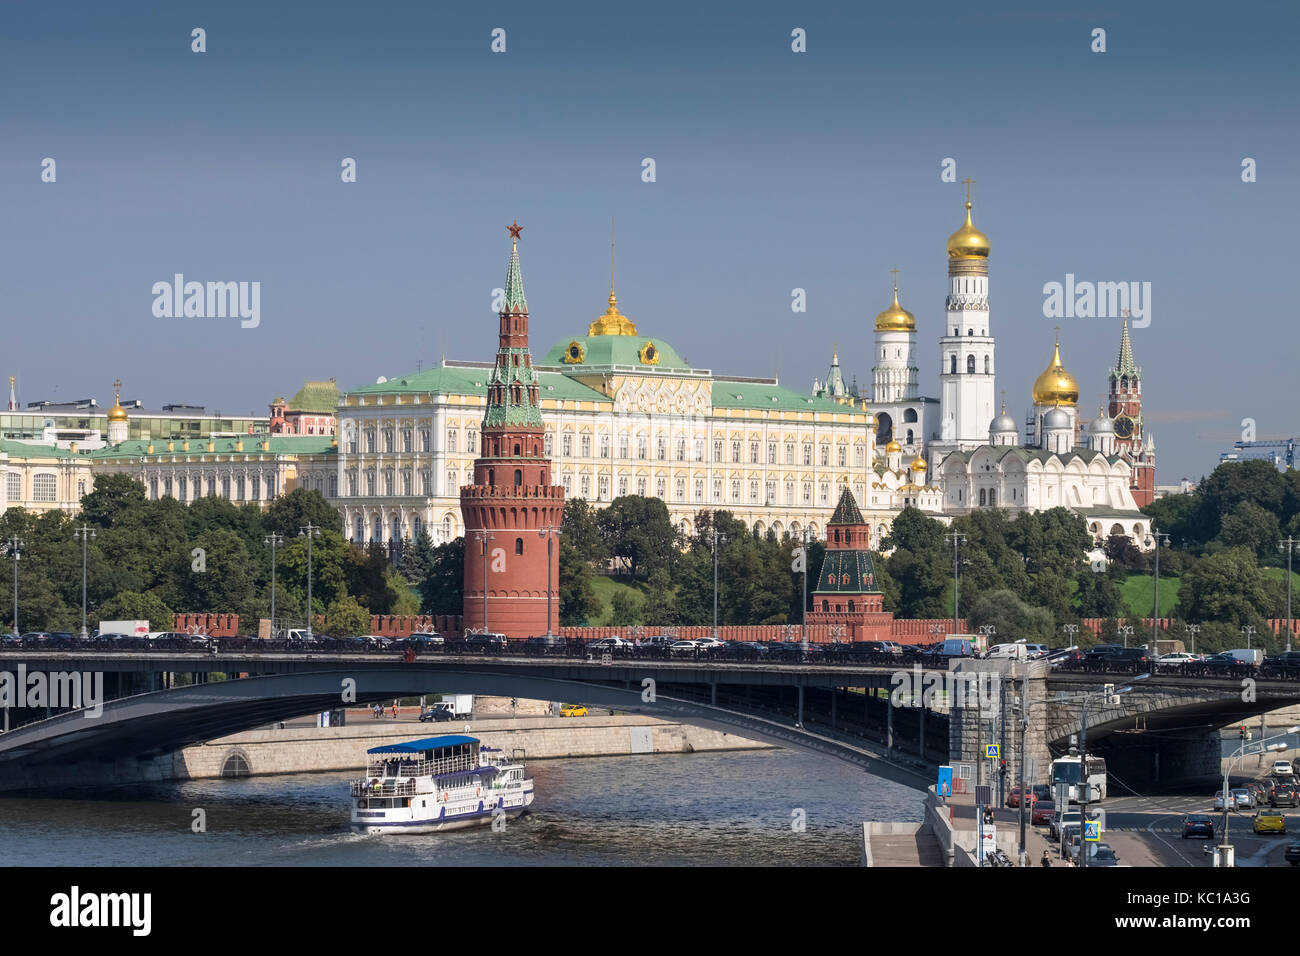 Cityscape view of Vodovzvodnaya Tower on the south western side of the Kremlin, overlooking the Moscow River, Moscow, Russia. Stock Photo